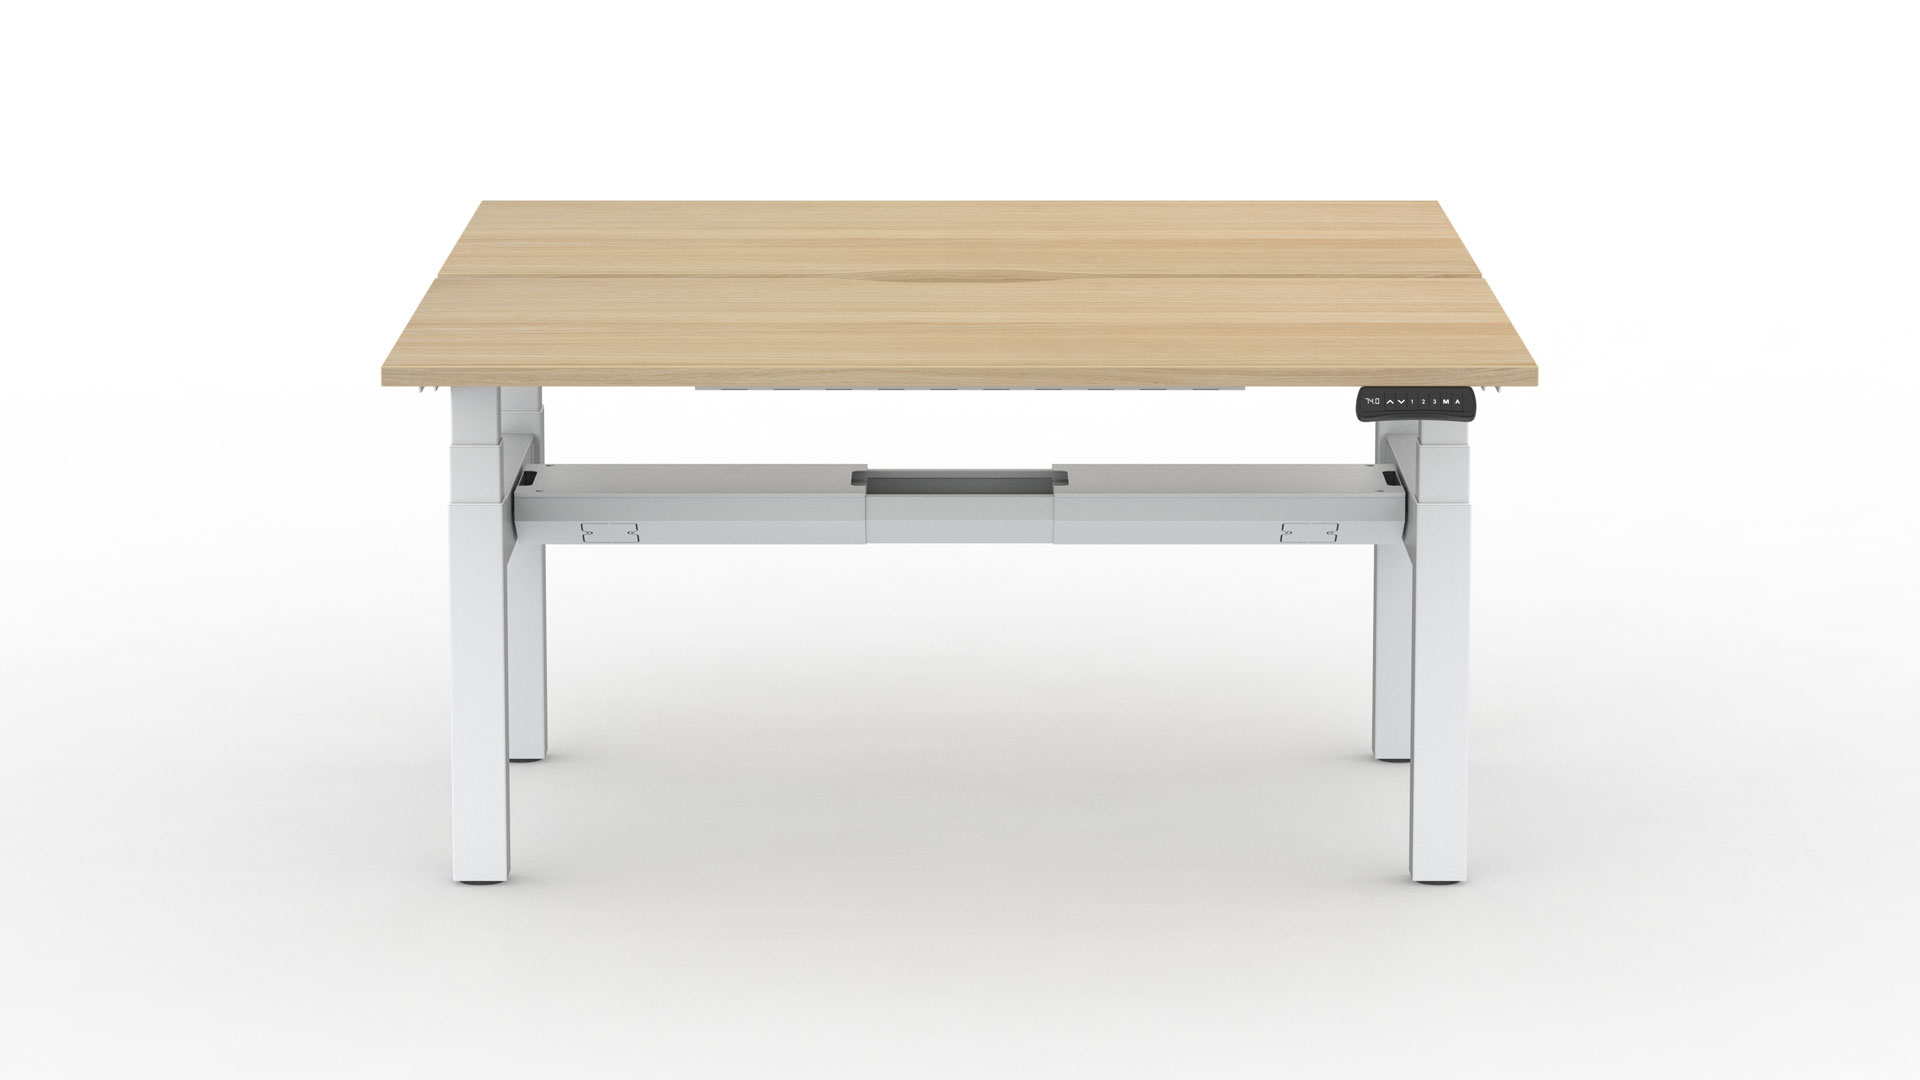 Alto 2 bench desk frames will accommodate a range of desktop sizes and styles